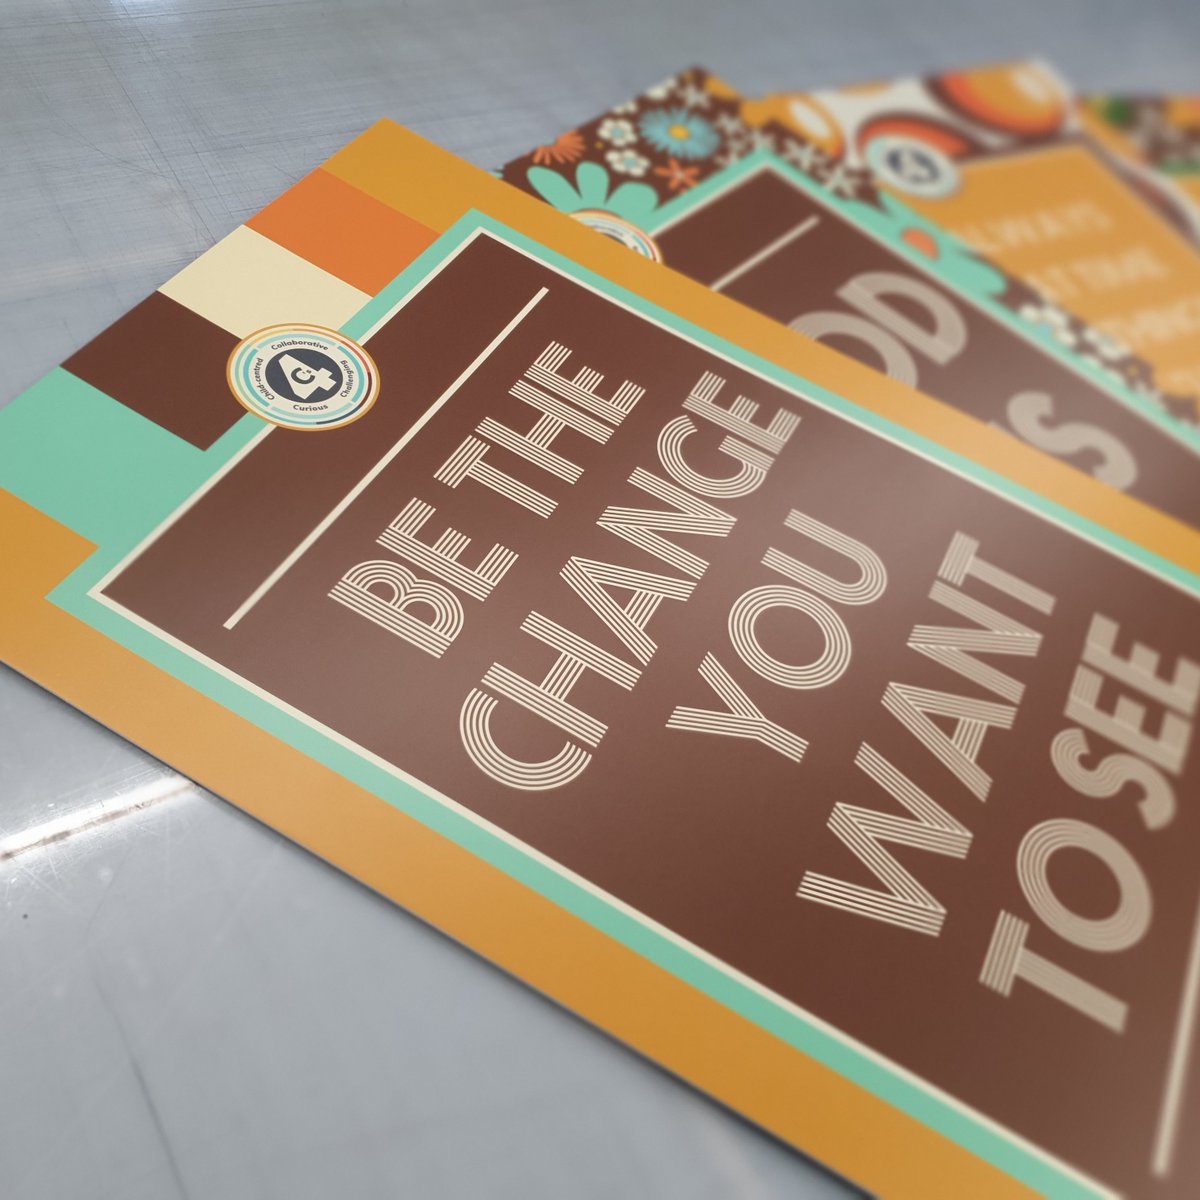 We recently had the pleasure of creating these groovy #Signs for a @WhiteWoodsPAT1 event 🌻🌼🌻

These retro inspired designs were put together by @julie_tallant and was a fantastic project to work on!

#RCGraphixLtd #WWPATFestivalOfLearning2023 #MadeInYorkshire #BarnsleyIsBrill